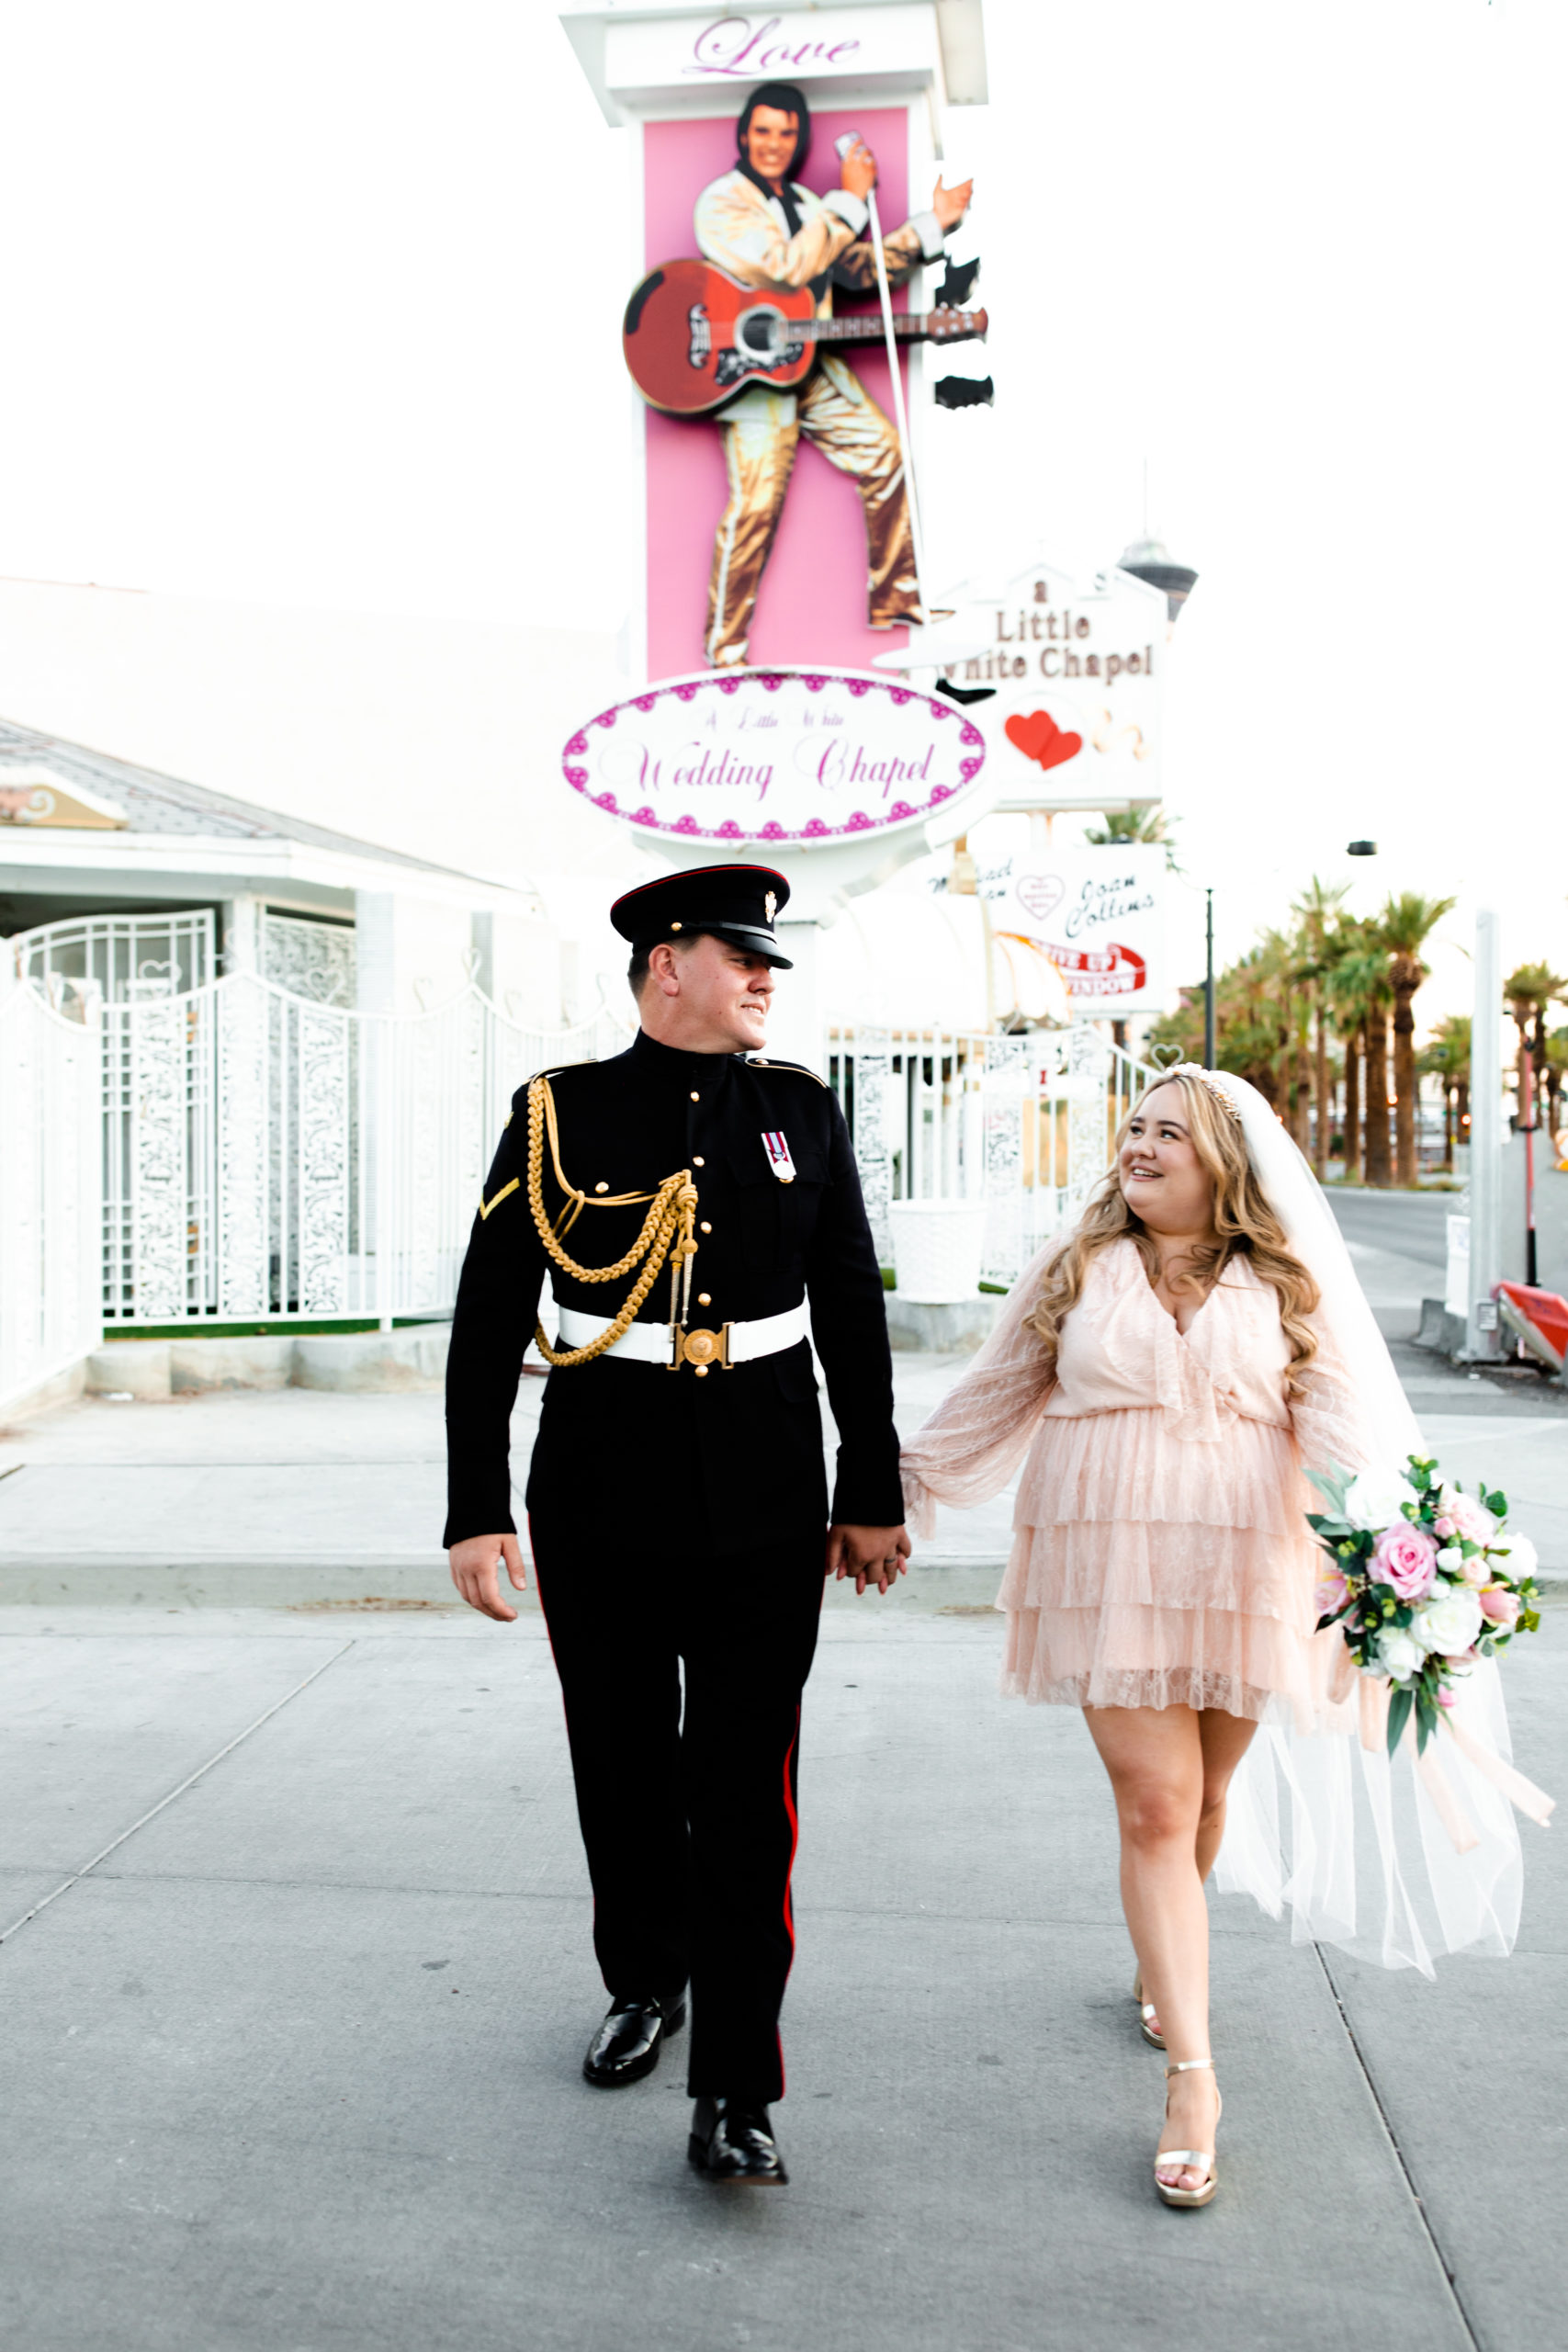 A bride and groom celebrating their elopement at the Little White Chapel in Las Vegas